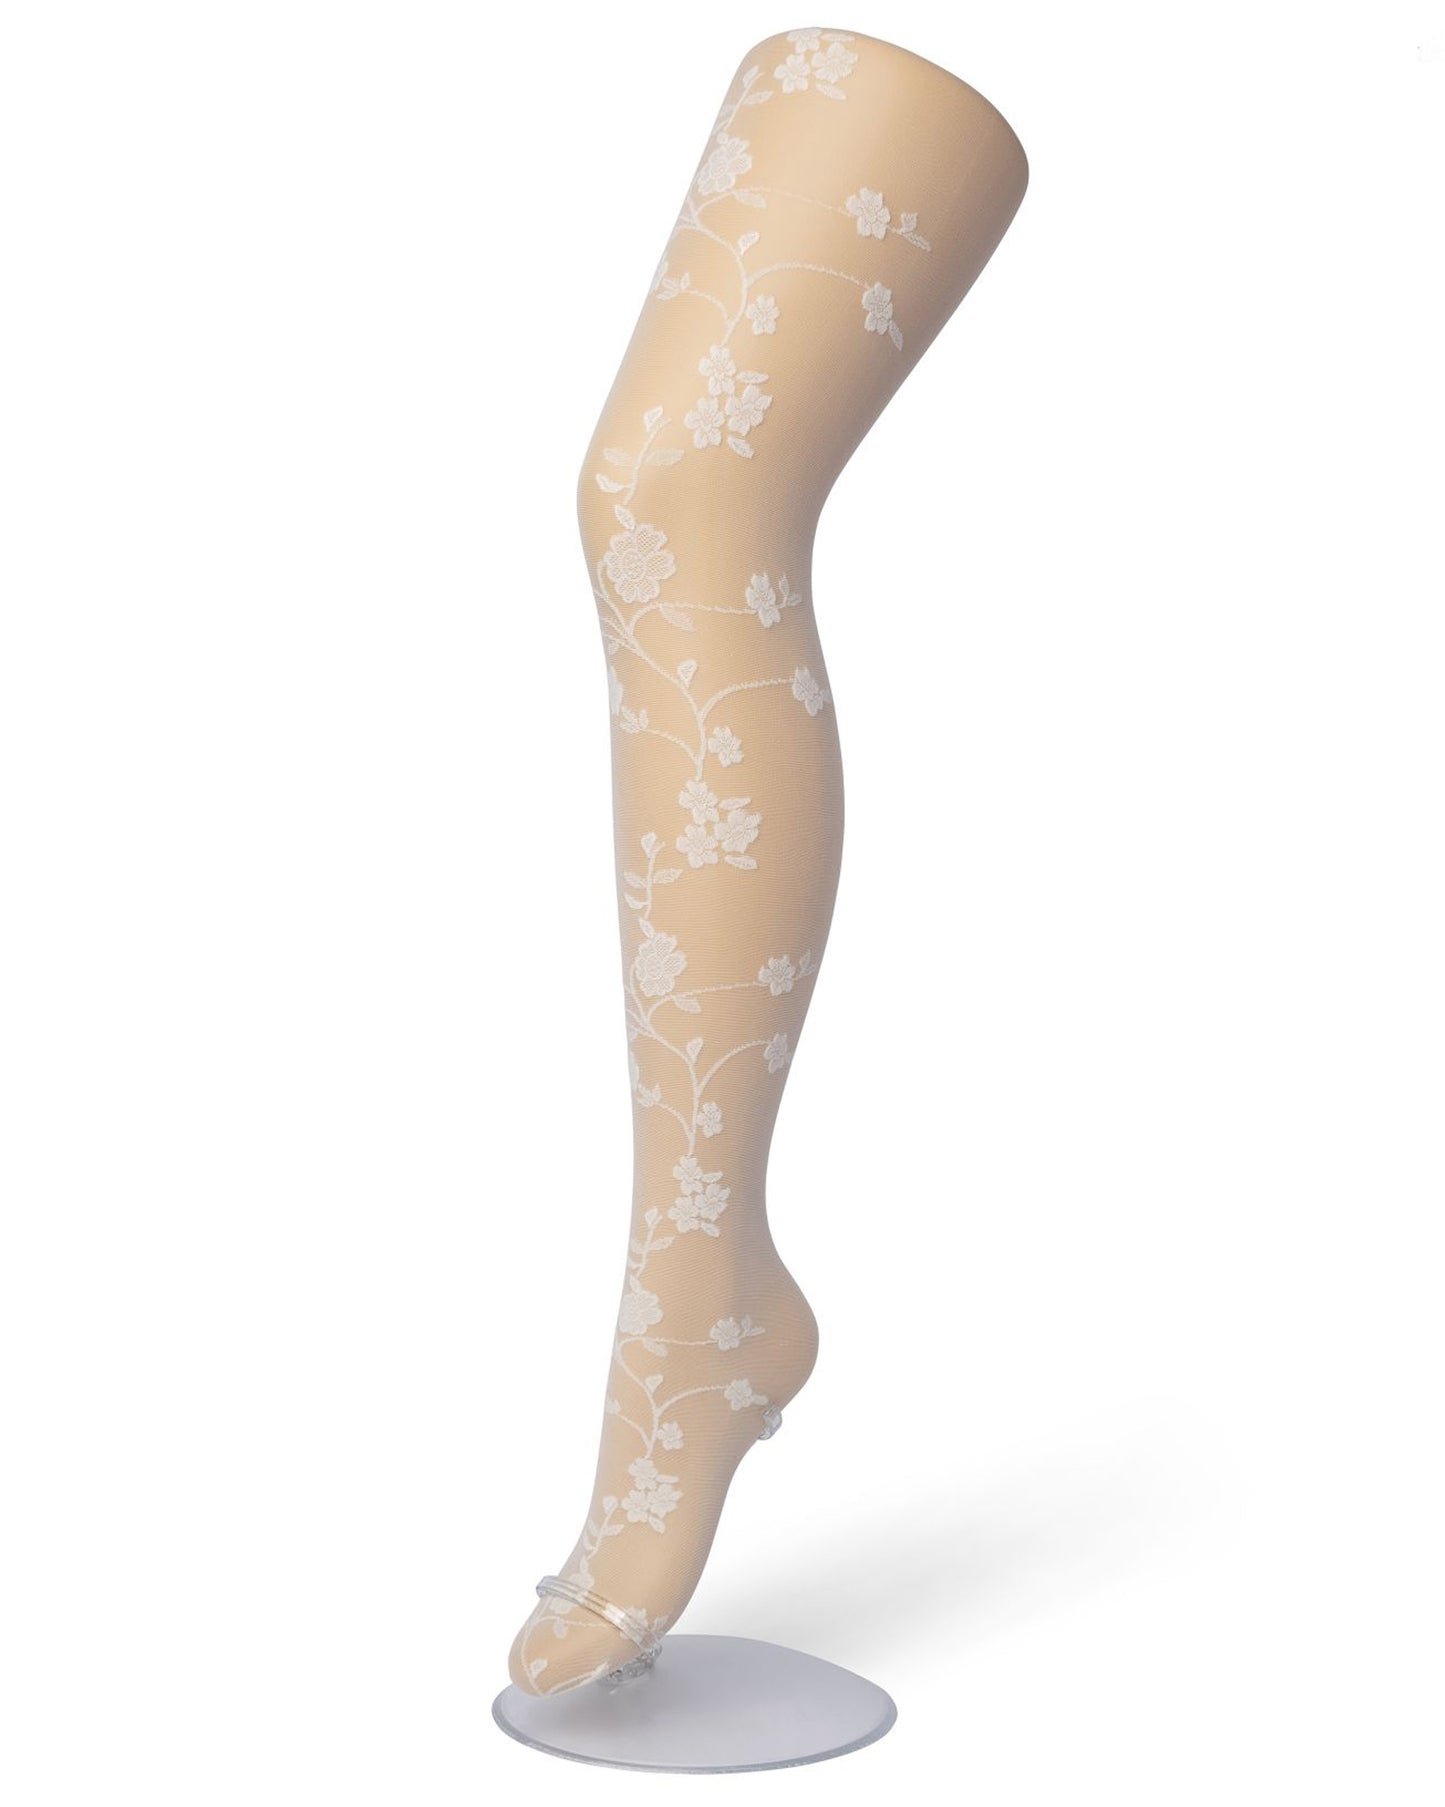 Bonnie Doon Bloom Tights - Sheer ivory cream fashion tights with a woven floral vine pattern on the front and plain on the back, reinforced boxer top brief and gusset.